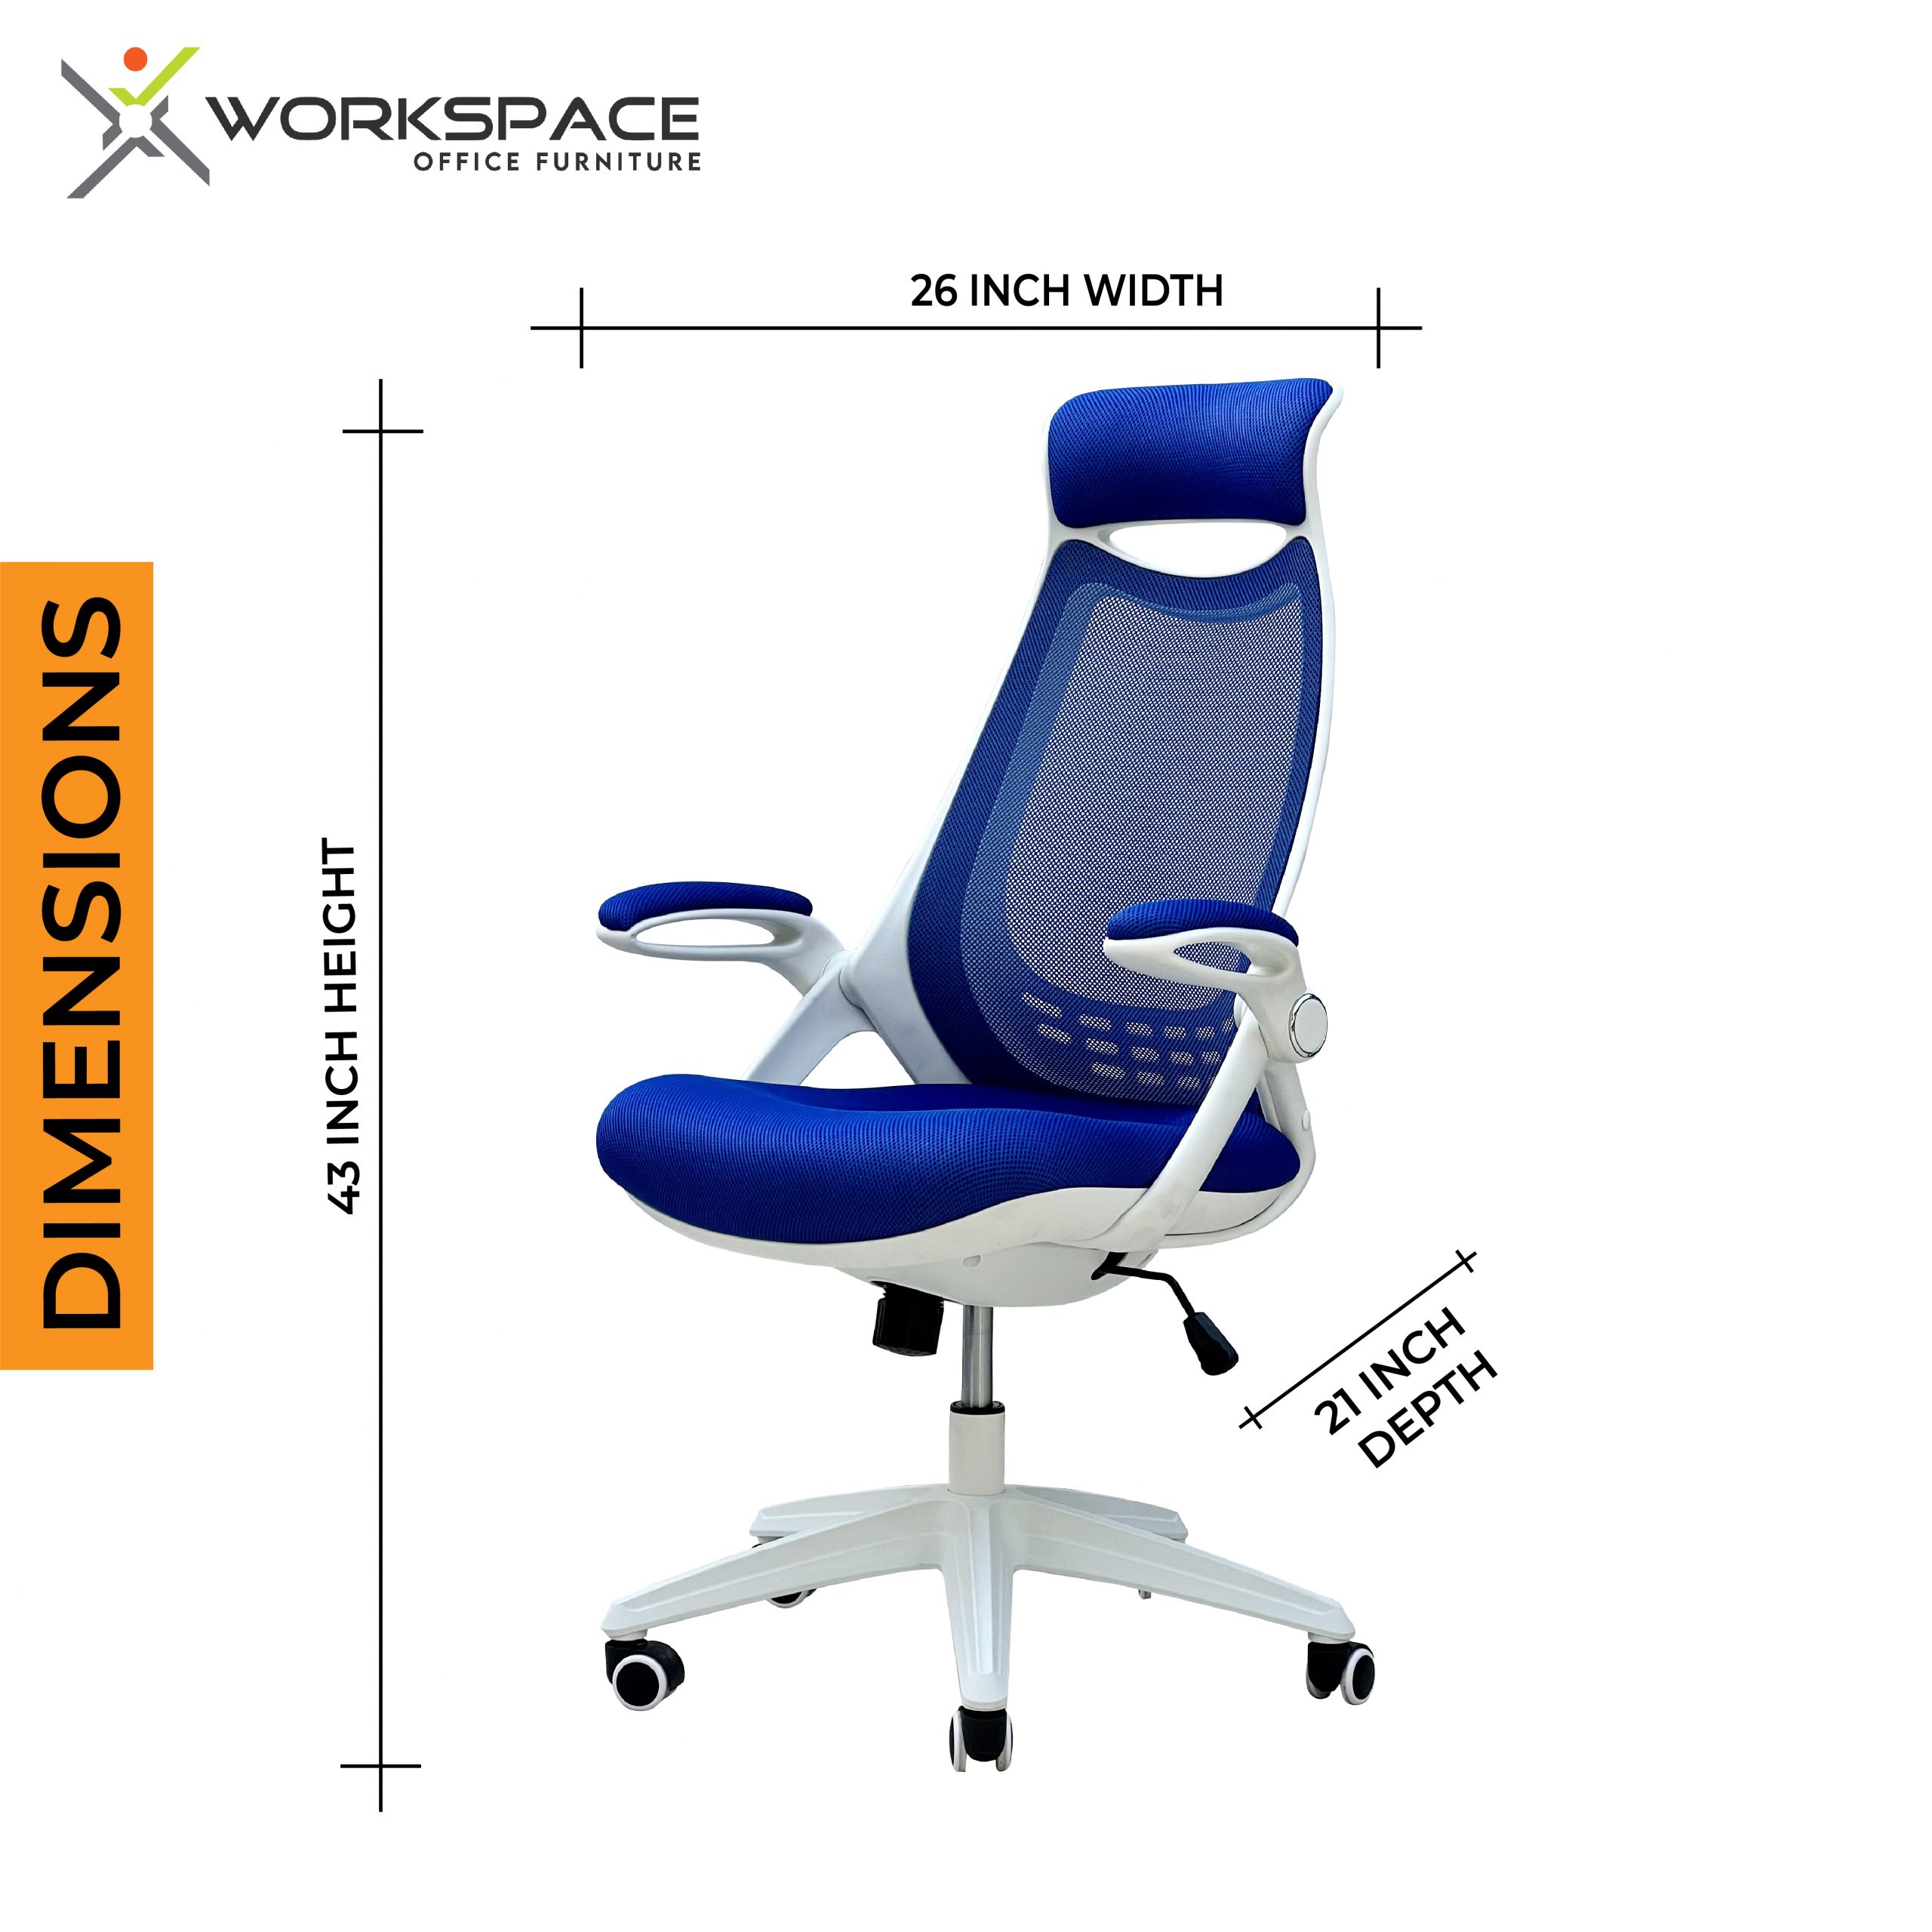 Chris Manager Chair (Blue)